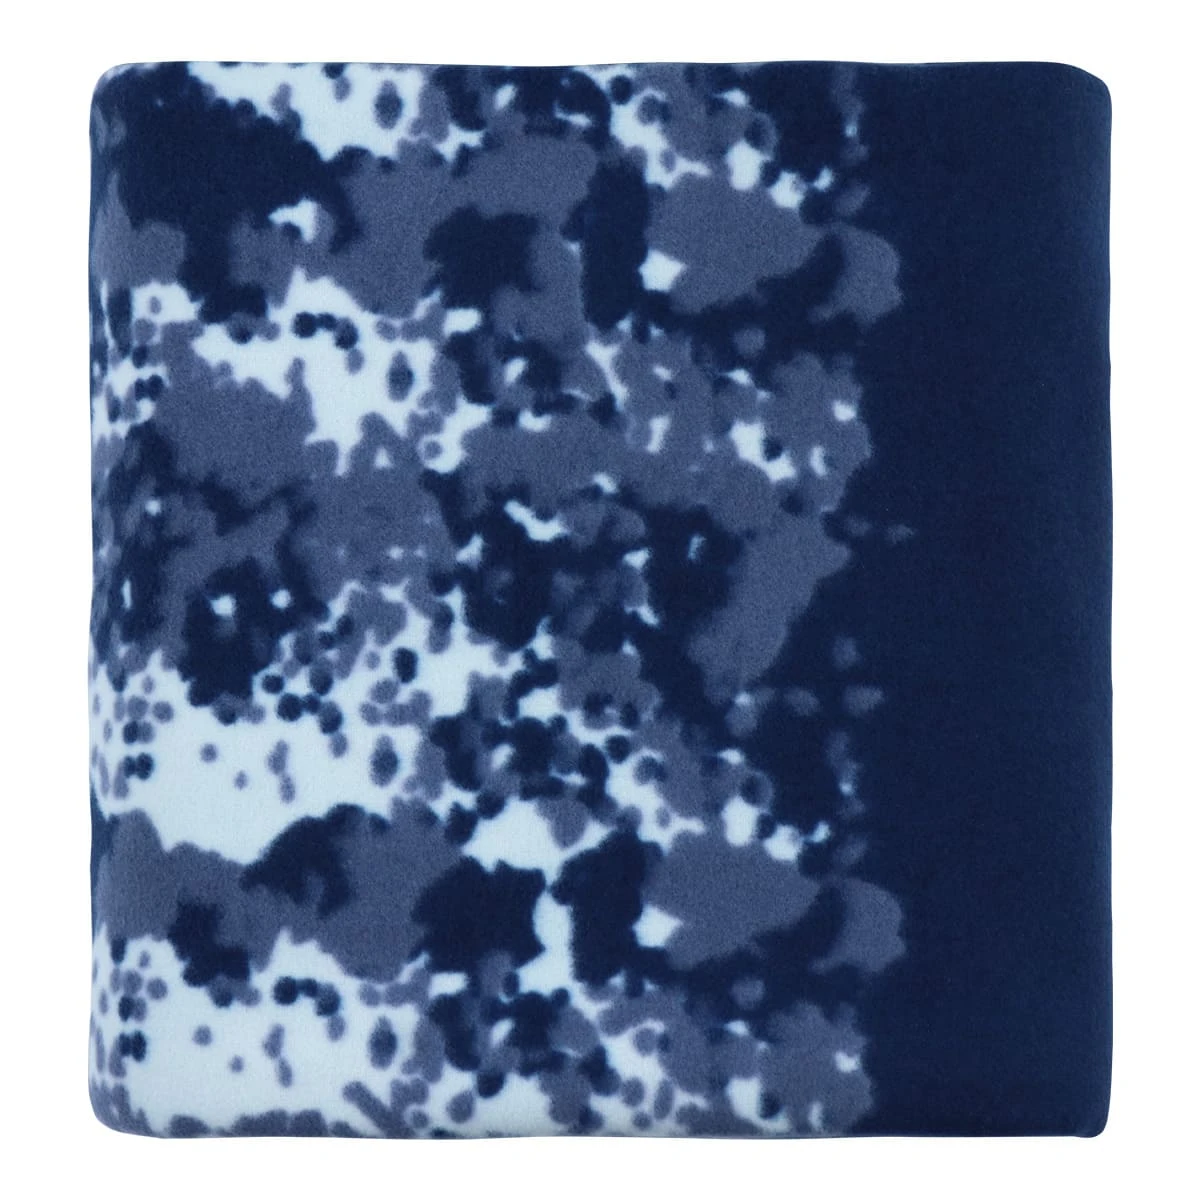 100% Recycled Polyester Bottles Printed Fleece Blanket - I Love Recycling (Navy)